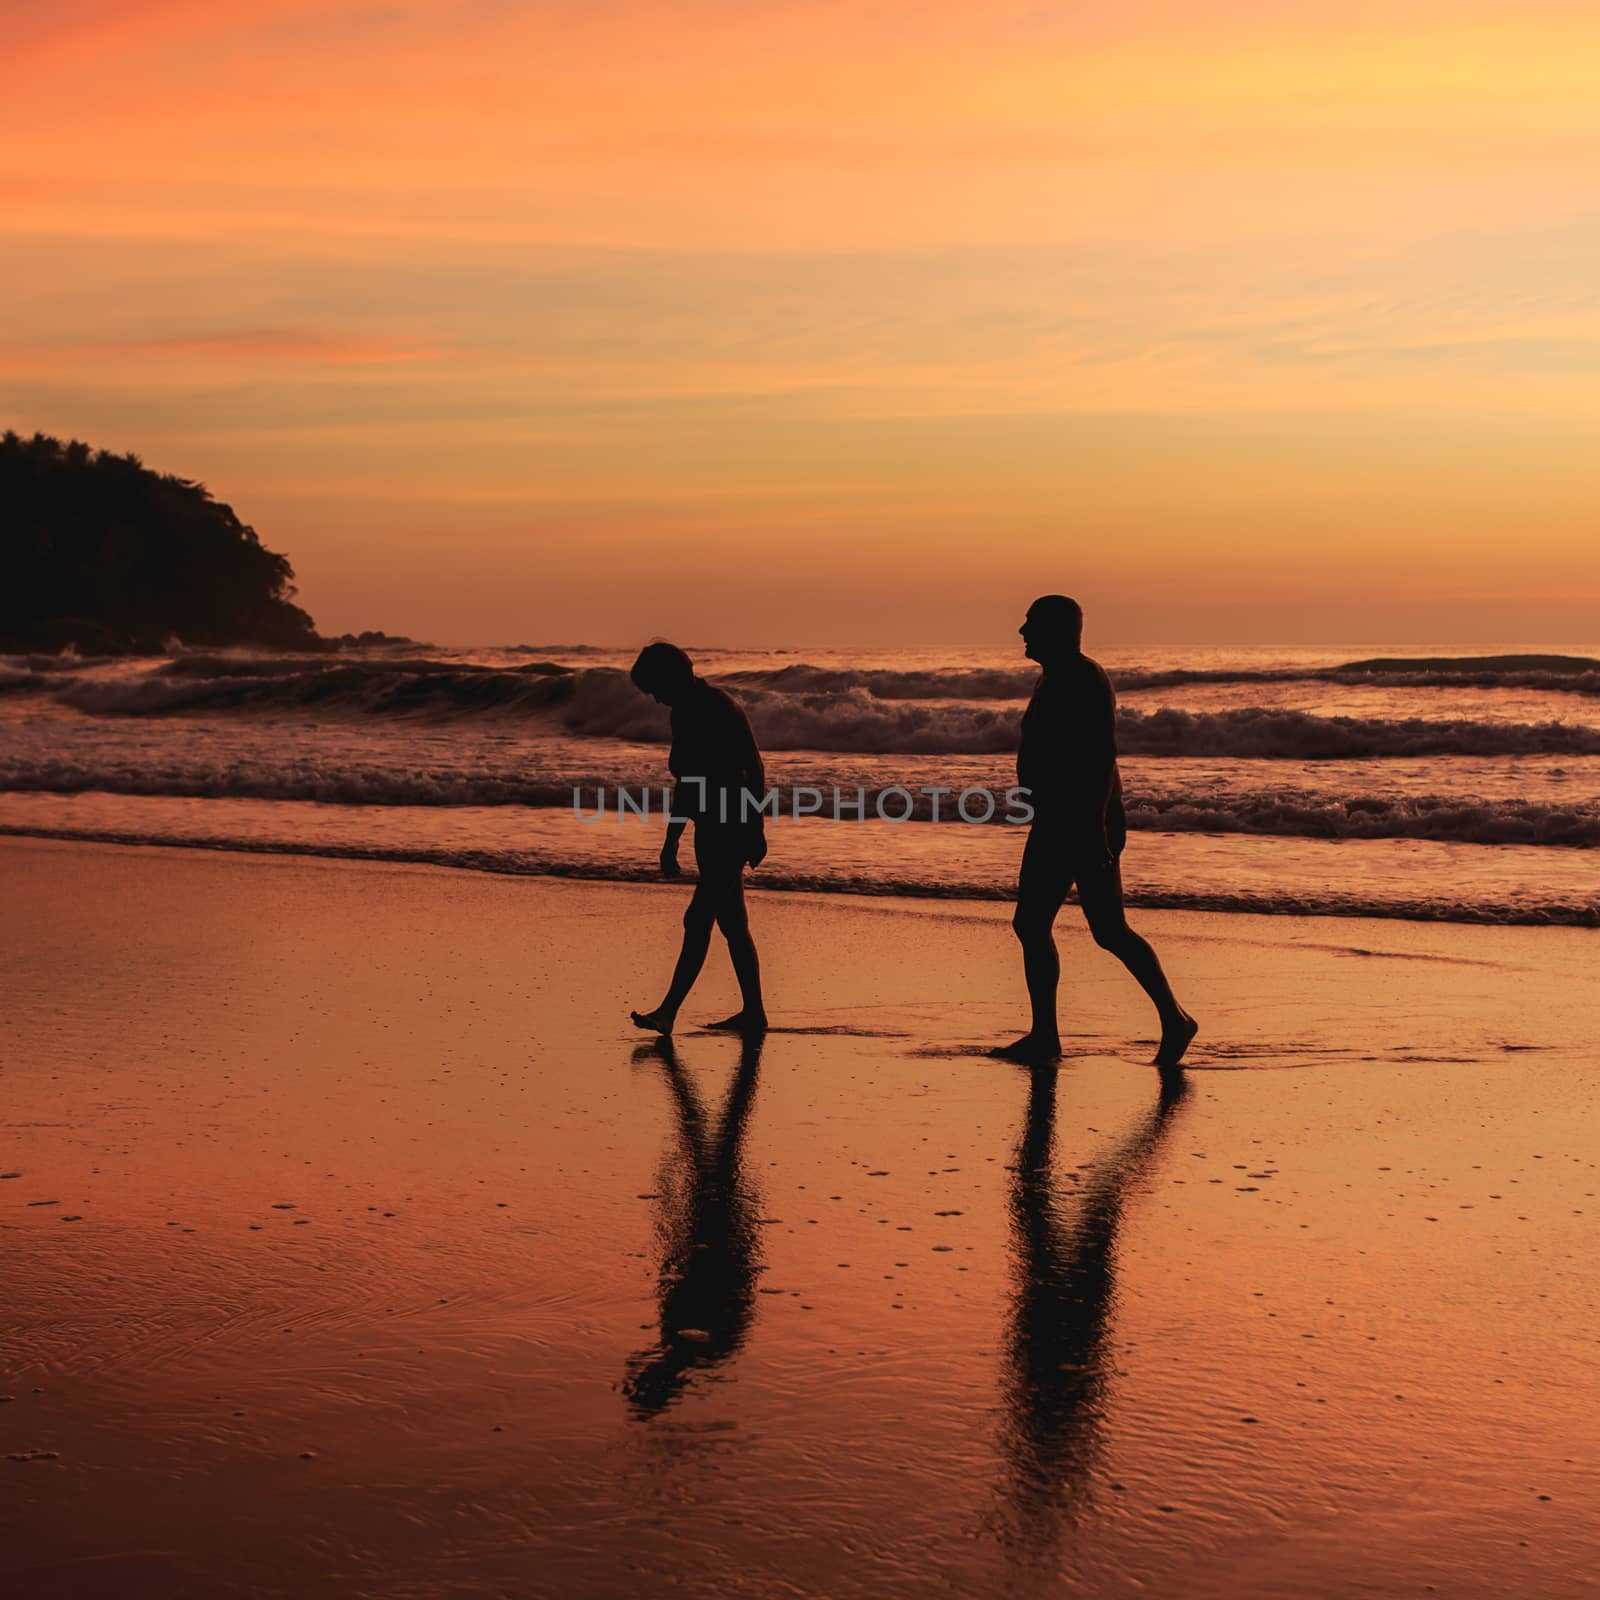 Silhouette of tourist at sunset beach in Phuket Thailand by nanDphanuwat